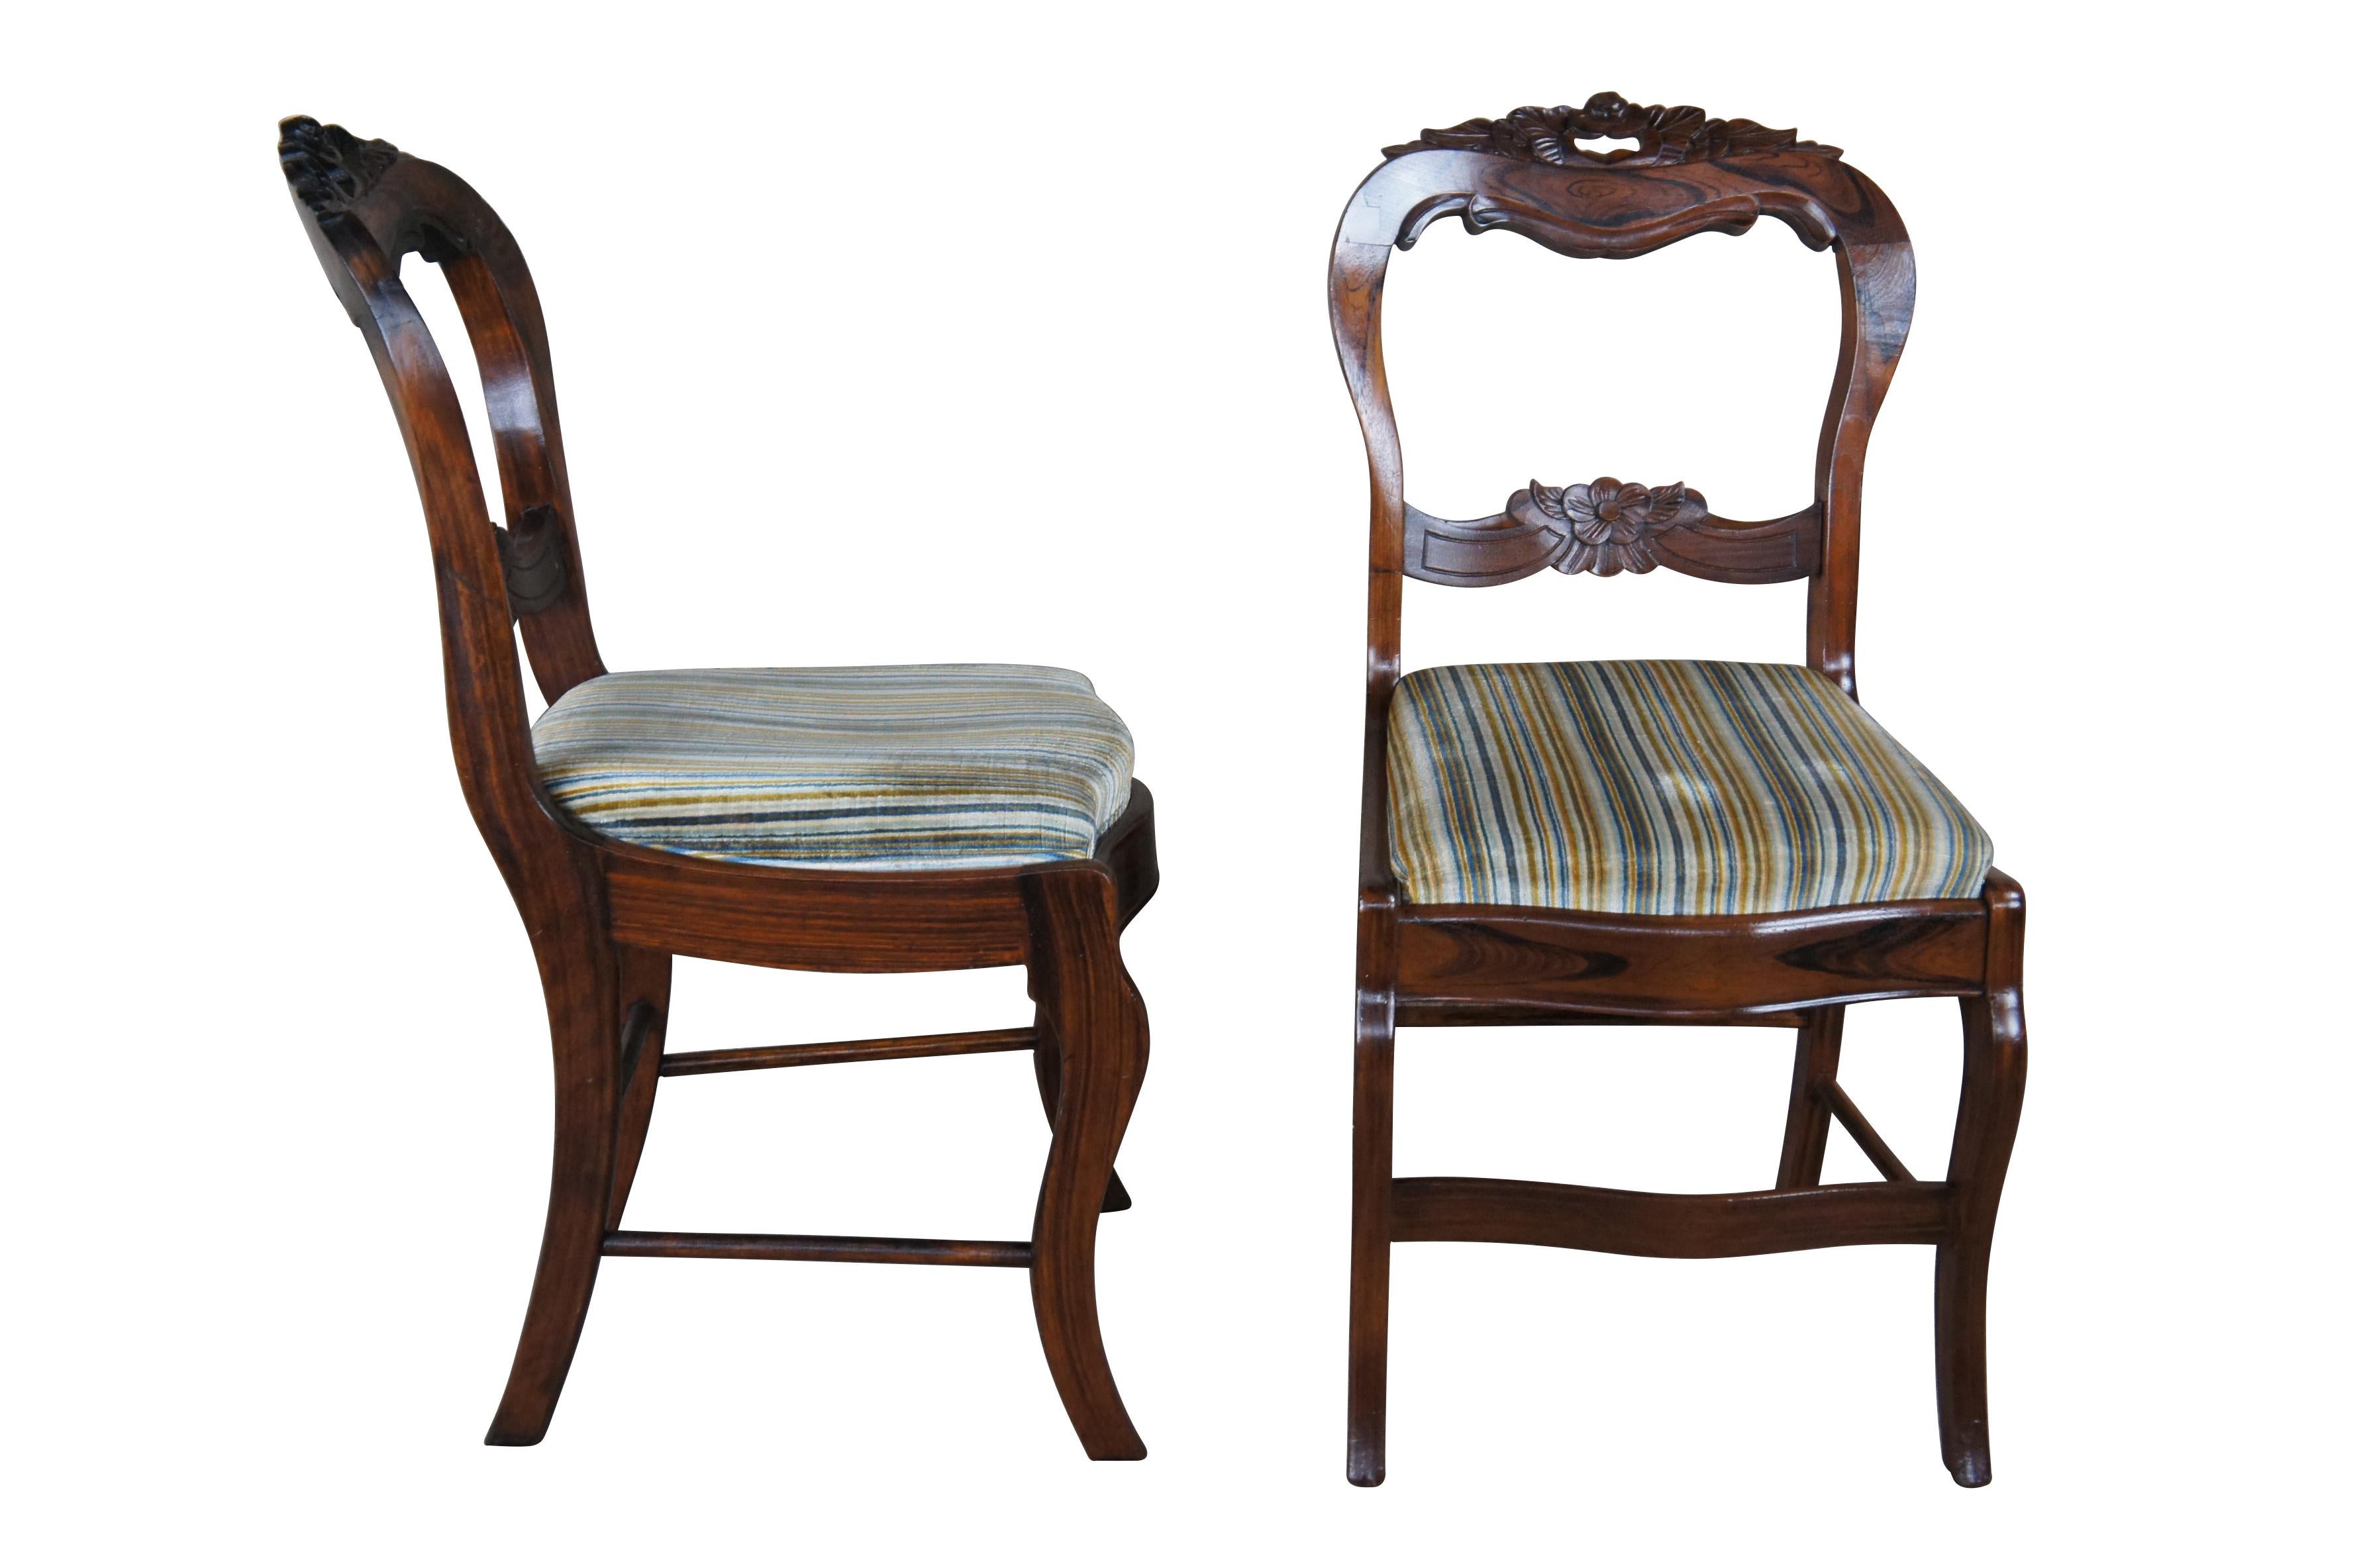 Two antique Duncan Phyfe / Balloon back style dining chairs.  Made of rosewood featuring serpentine form with carved floral accents and striped upholstery.

Dimensions: 
17